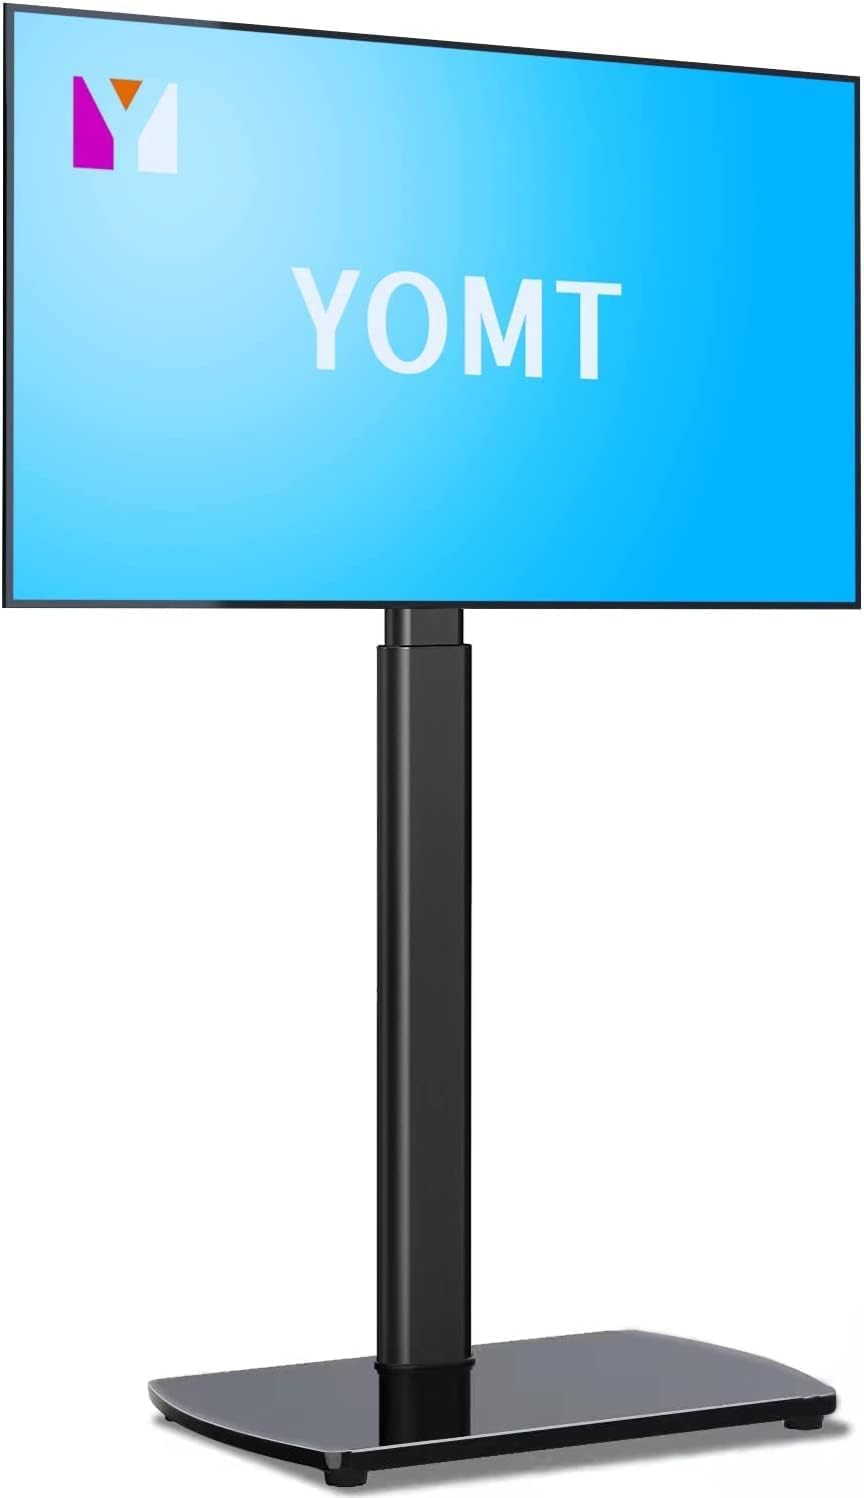 YOMT Universal TV Floor Stand with Apple TV/Roku Ultra Mount for 27-65 Inch LCD LED OLED TVs, Swivel Height Adjustable and Space Saving Design for Corner Bedroom Living Room, Black